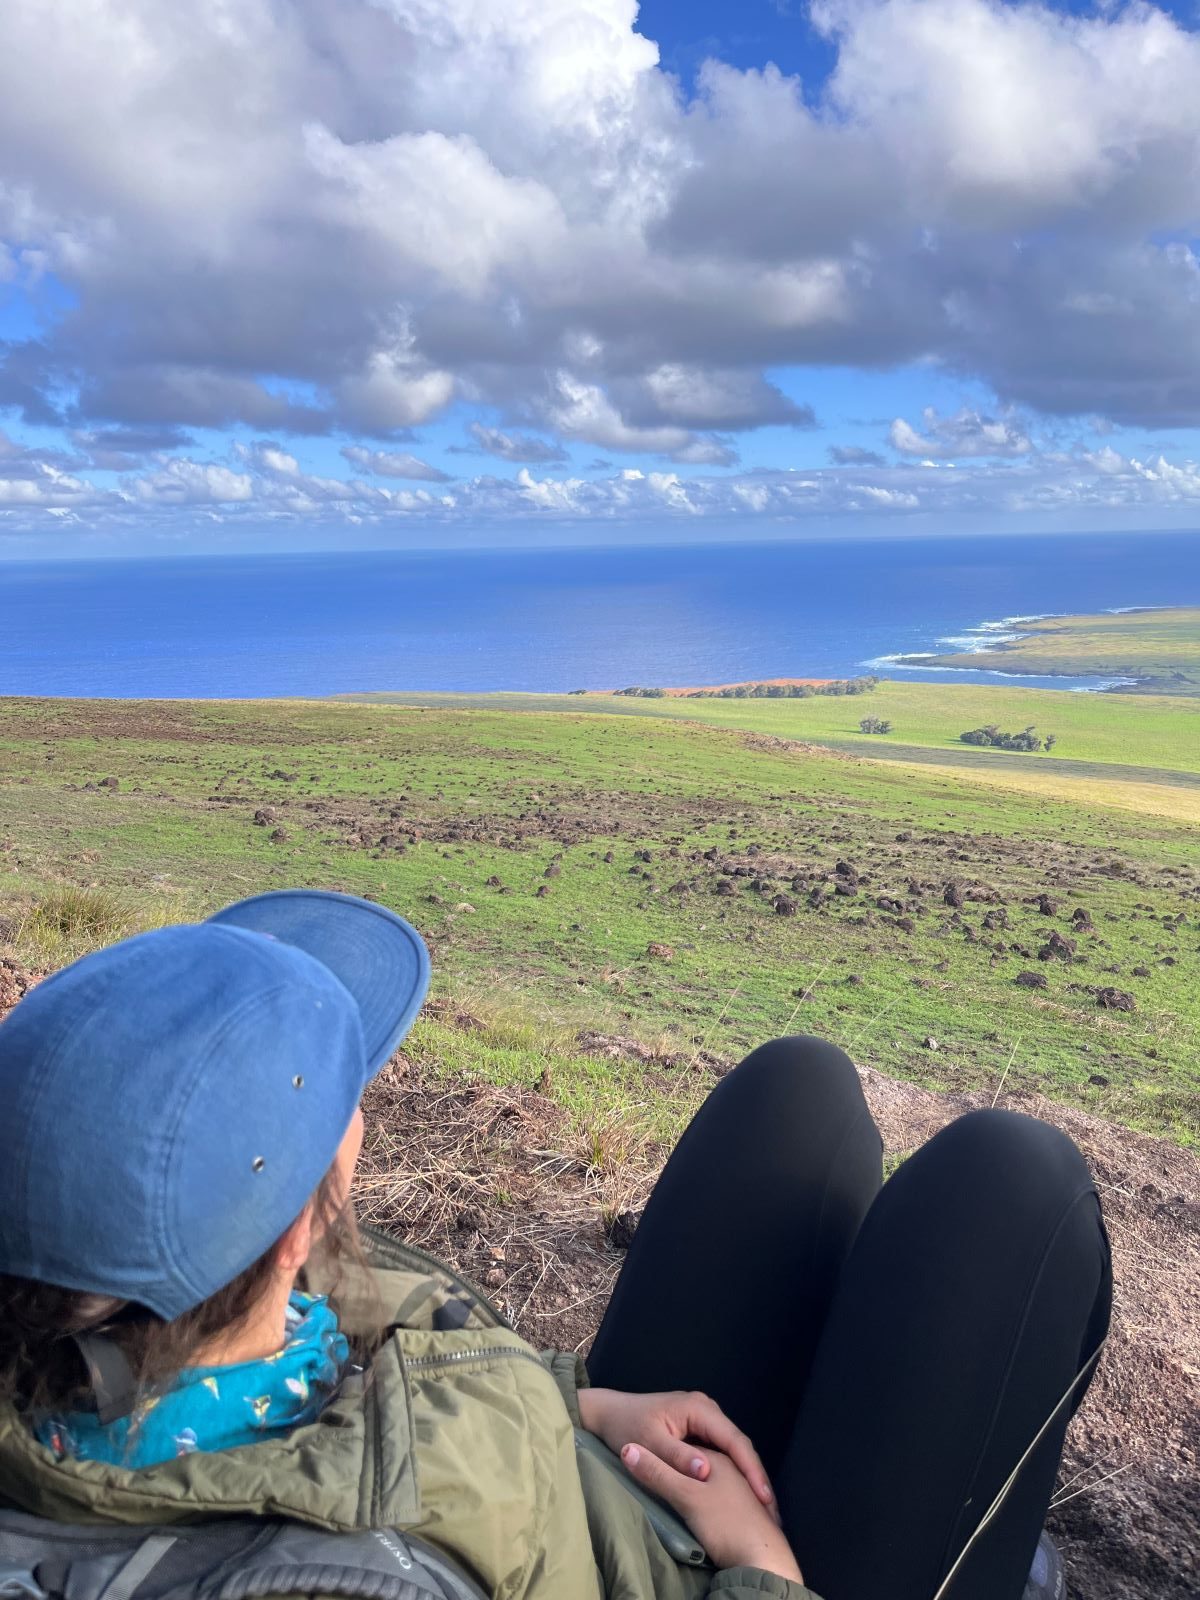 Sydney sitting on the slope of a volcano at Easter Island, looking out at the ocean